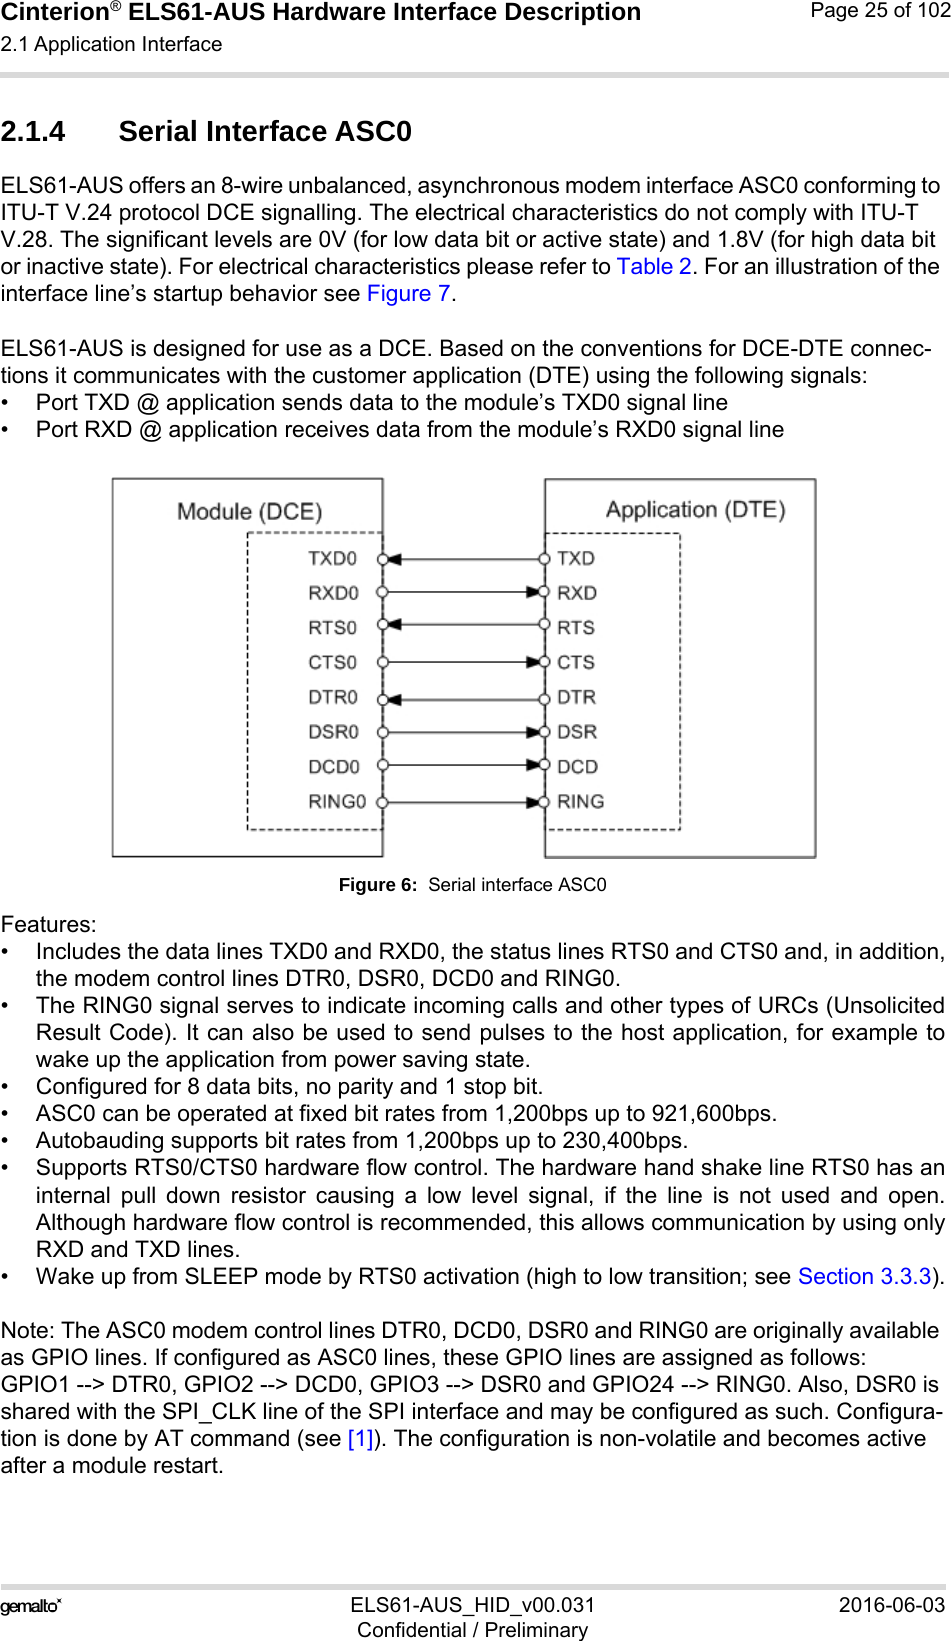 Cinterion® ELS61-AUS Hardware Interface Description2.1 Application Interface52ELS61-AUS_HID_v00.031 2016-06-03Confidential / PreliminaryPage 25 of 1022.1.4 Serial Interface ASC0ELS61-AUS offers an 8-wire unbalanced, asynchronous modem interface ASC0 conforming to ITU-T V.24 protocol DCE signalling. The electrical characteristics do not comply with ITU-T V.28. The significant levels are 0V (for low data bit or active state) and 1.8V (for high data bit or inactive state). For electrical characteristics please refer to Table 2. For an illustration of the interface line’s startup behavior see Figure 7.ELS61-AUS is designed for use as a DCE. Based on the conventions for DCE-DTE connec-tions it communicates with the customer application (DTE) using the following signals:• Port TXD @ application sends data to the module’s TXD0 signal line• Port RXD @ application receives data from the module’s RXD0 signal lineFigure 6:  Serial interface ASC0Features:• Includes the data lines TXD0 and RXD0, the status lines RTS0 and CTS0 and, in addition,the modem control lines DTR0, DSR0, DCD0 and RING0.• The RING0 signal serves to indicate incoming calls and other types of URCs (UnsolicitedResult Code). It can also be used to send pulses to the host application, for example towake up the application from power saving state. • Configured for 8 data bits, no parity and 1 stop bit. • ASC0 can be operated at fixed bit rates from 1,200bps up to 921,600bps.• Autobauding supports bit rates from 1,200bps up to 230,400bps.• Supports RTS0/CTS0 hardware flow control. The hardware hand shake line RTS0 has aninternal pull down resistor causing a low level signal, if the line is not used and open.Although hardware flow control is recommended, this allows communication by using onlyRXD and TXD lines.• Wake up from SLEEP mode by RTS0 activation (high to low transition; see Section 3.3.3).Note: The ASC0 modem control lines DTR0, DCD0, DSR0 and RING0 are originally available as GPIO lines. If configured as ASC0 lines, these GPIO lines are assigned as follows: GPIO1 --&gt; DTR0, GPIO2 --&gt; DCD0, GPIO3 --&gt; DSR0 and GPIO24 --&gt; RING0. Also, DSR0 is shared with the SPI_CLK line of the SPI interface and may be configured as such. Configura-tion is done by AT command (see [1]). The configuration is non-volatile and becomes active after a module restart.